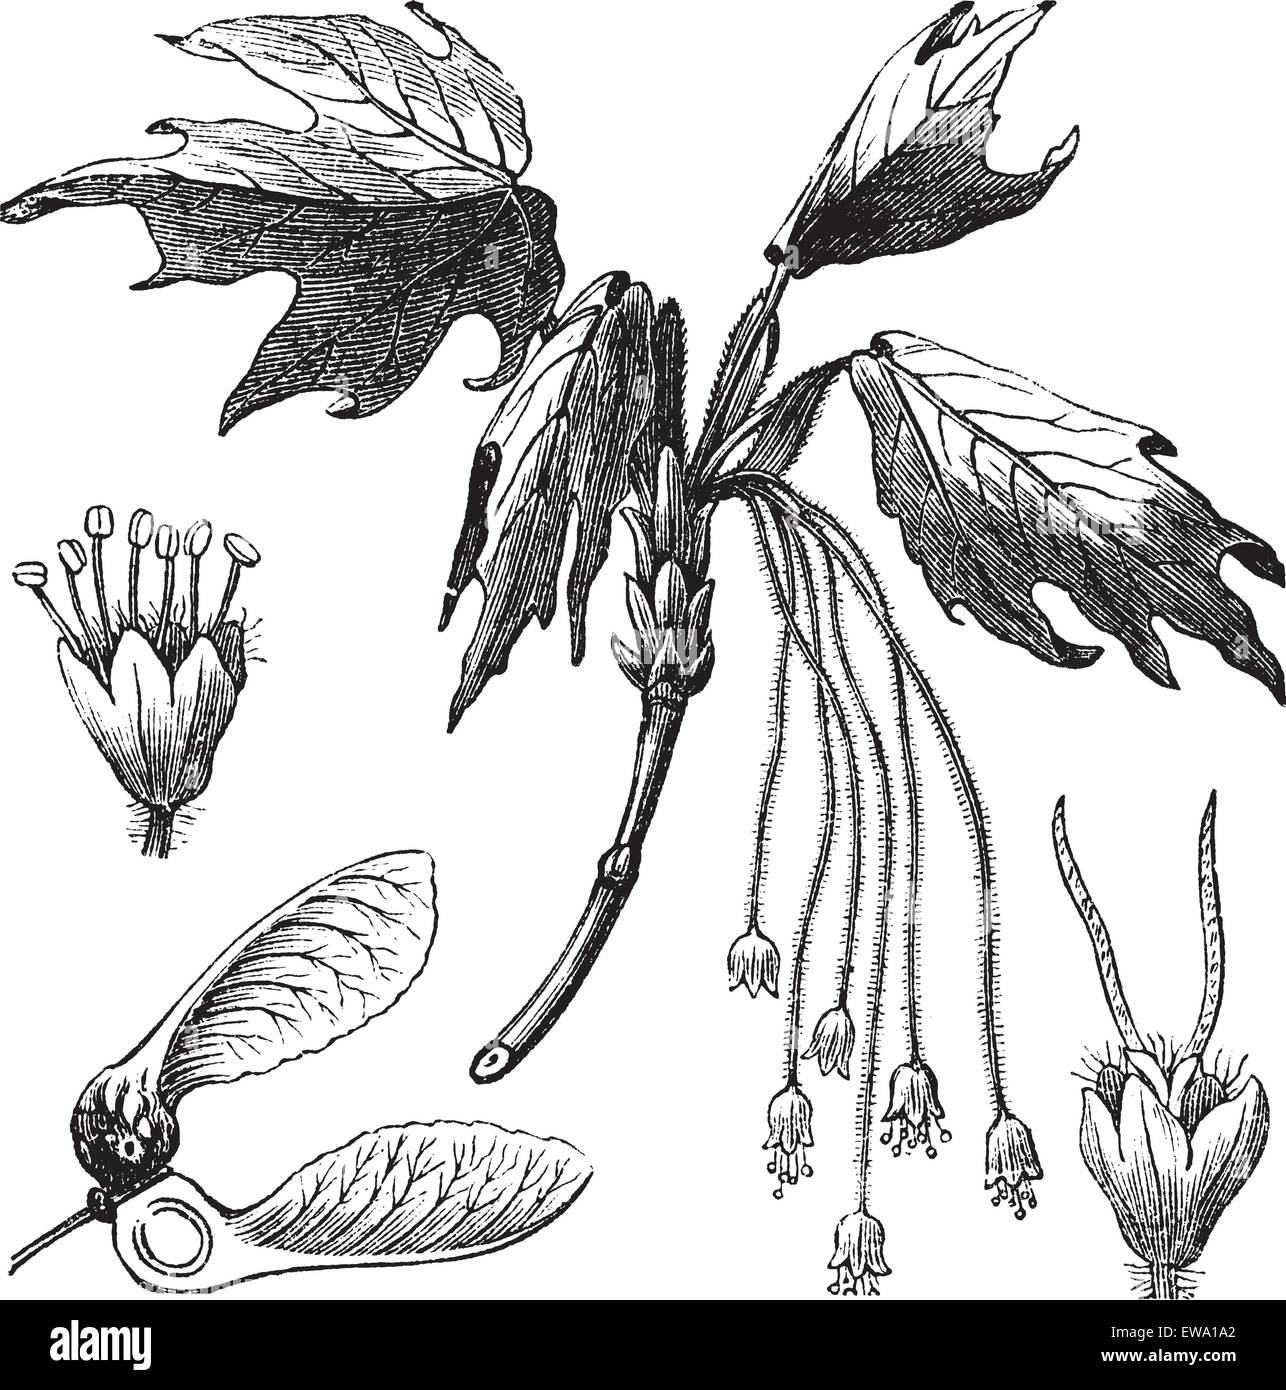 Silver Maple or Creek Maple or River Maple or Silverleaf Maple or Soft Maple or Water Maple or White Maple or Acer saccharinum, vintage engraving. Old engraved illustration of Silver Maple showing flowers and winged seed (lower left). Stock Vector